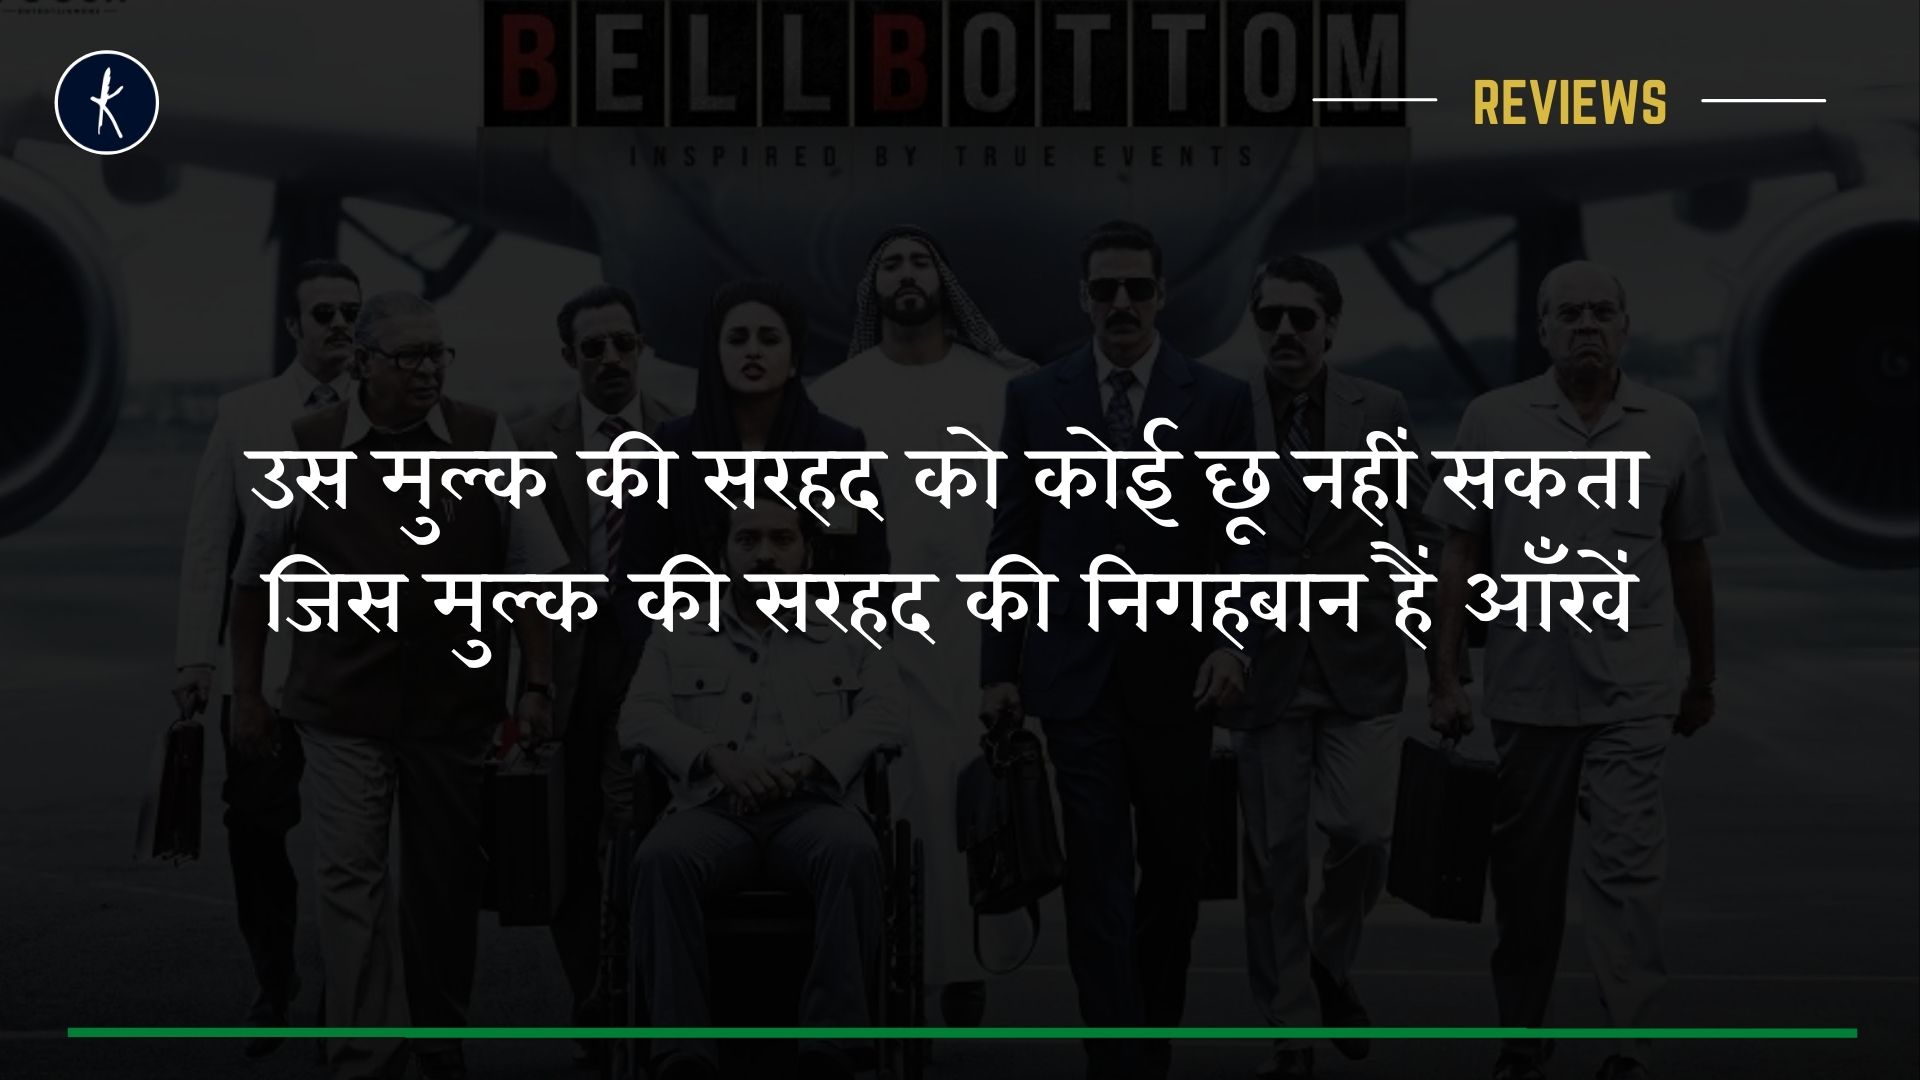 Bell bottom : Absolutely amazing and must watch!'s image